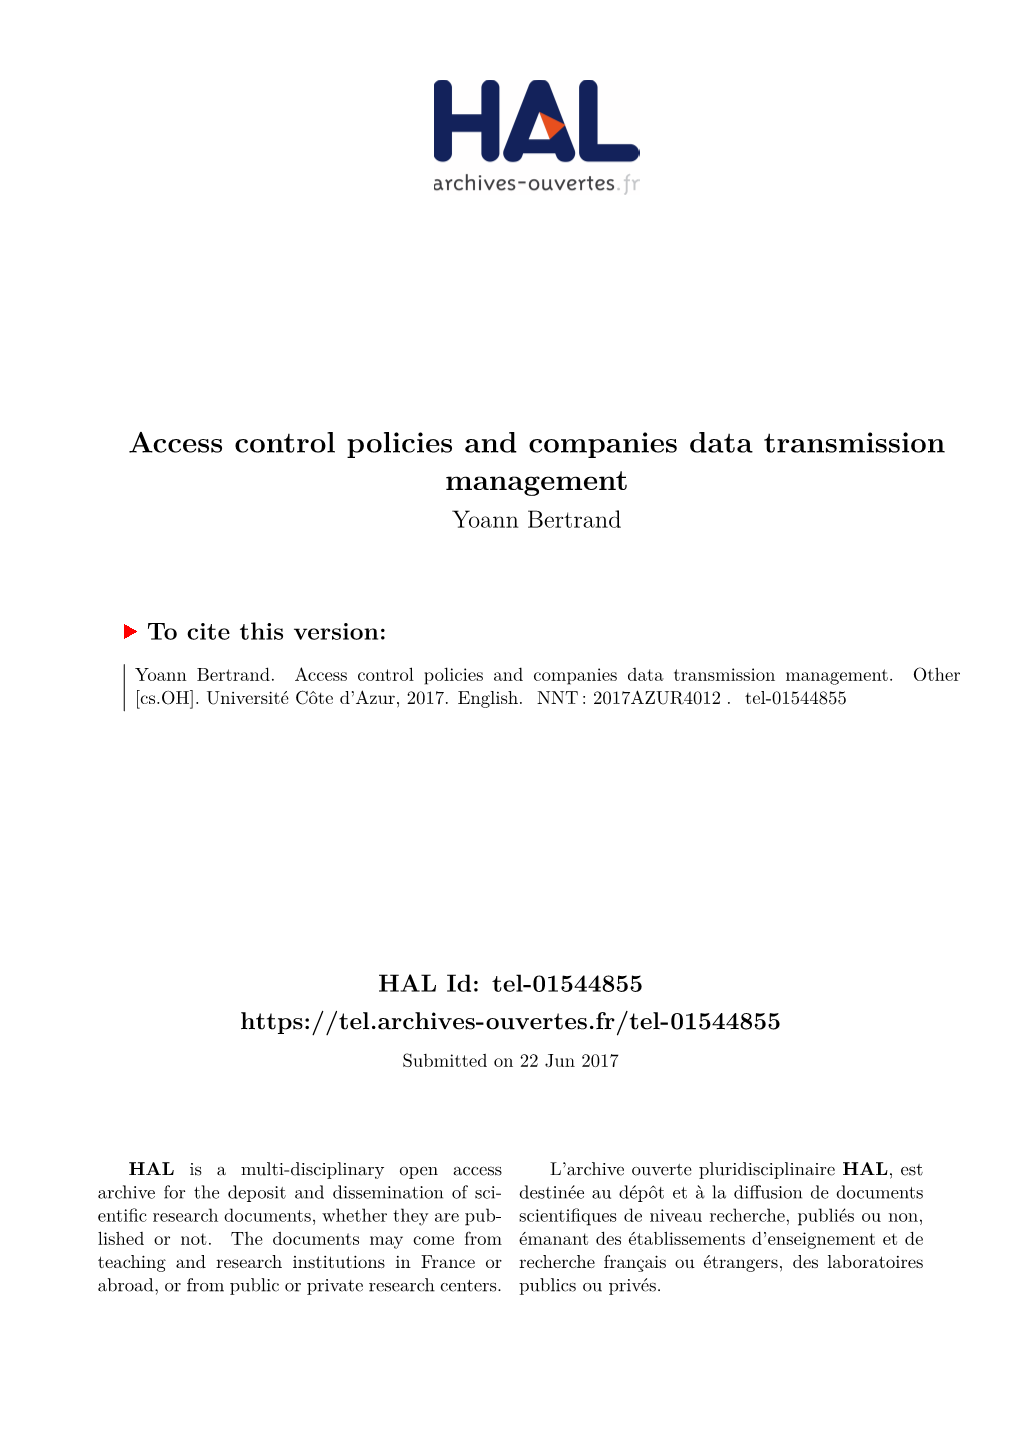 Access Control Policies and Companies Data Transmission Management Yoann Bertrand